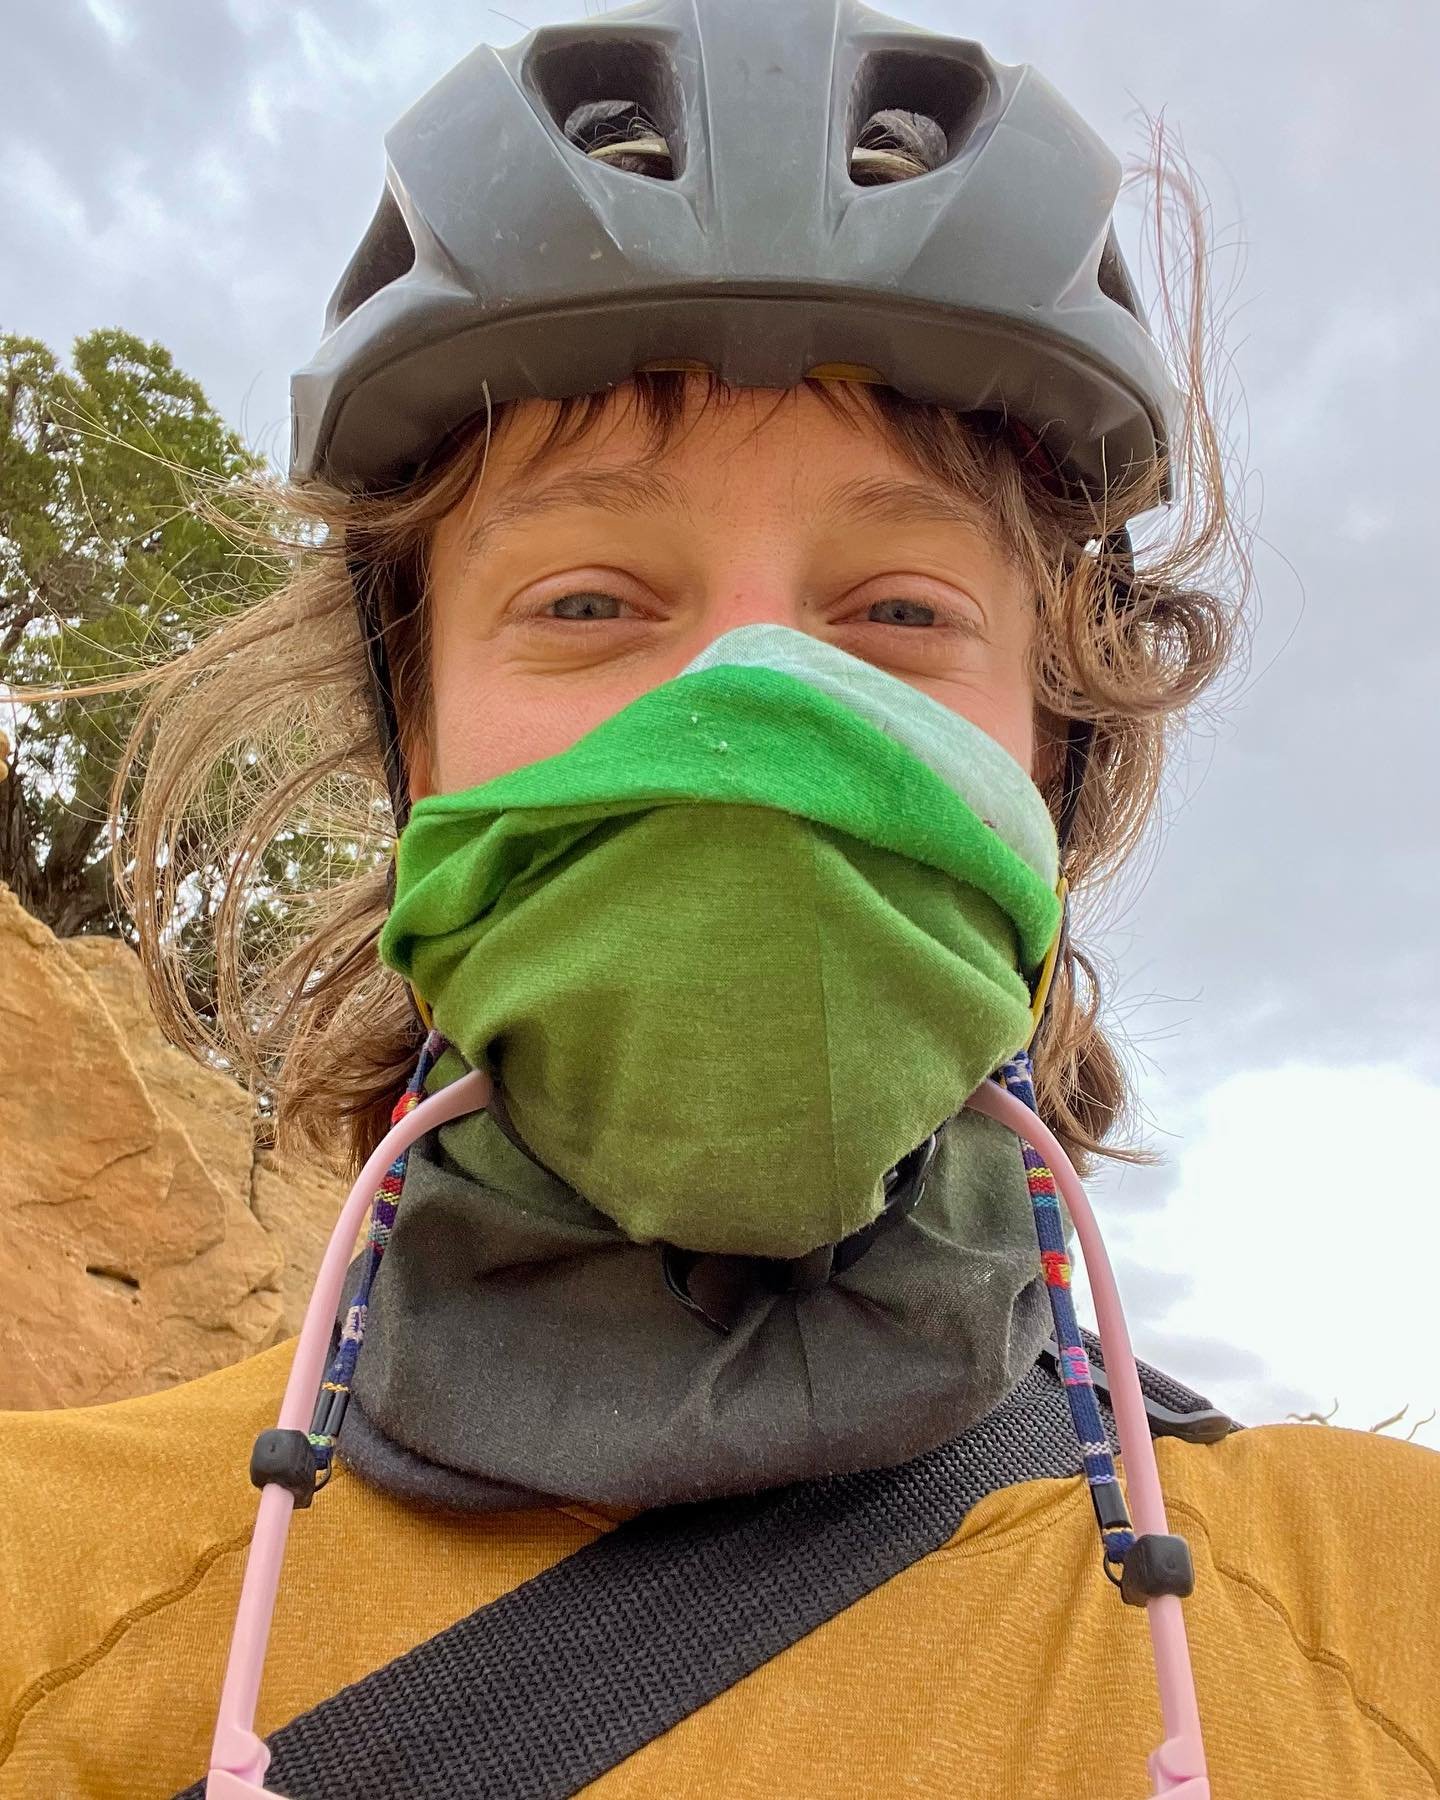 Just spent a week riding a big loop on mostly dirt from Green River, through Moab and Indian Creek, up through the Abajos and Monticello, through Bears Ears, Hanksville, and back with @grayson_wickel . He brought a small fiddle, I brought a small ban